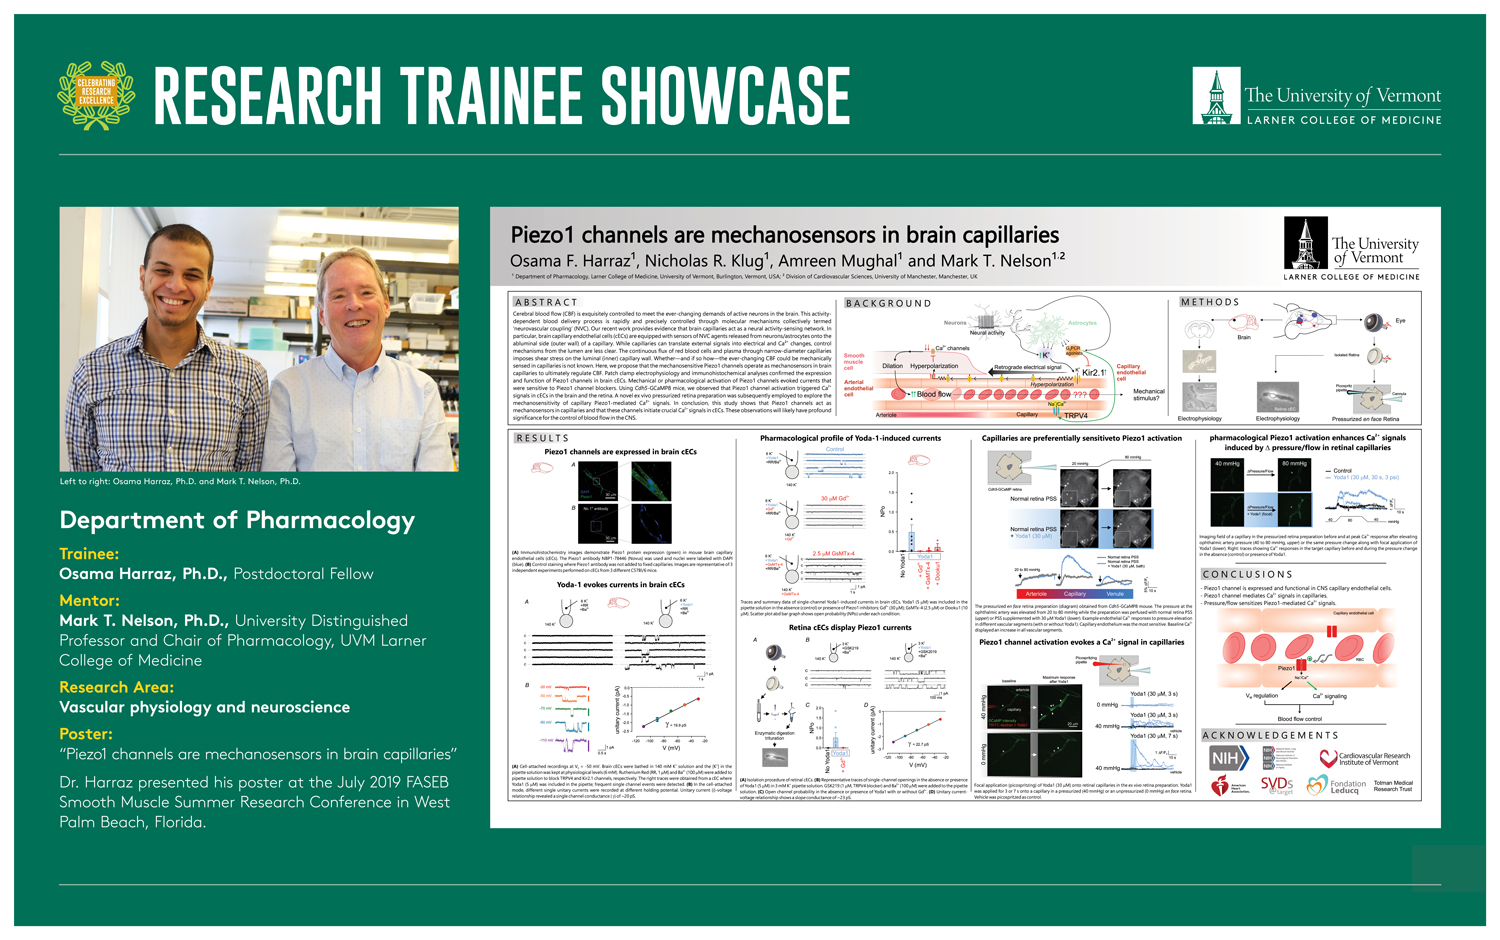 Research Trainee Showcase poster with graphics